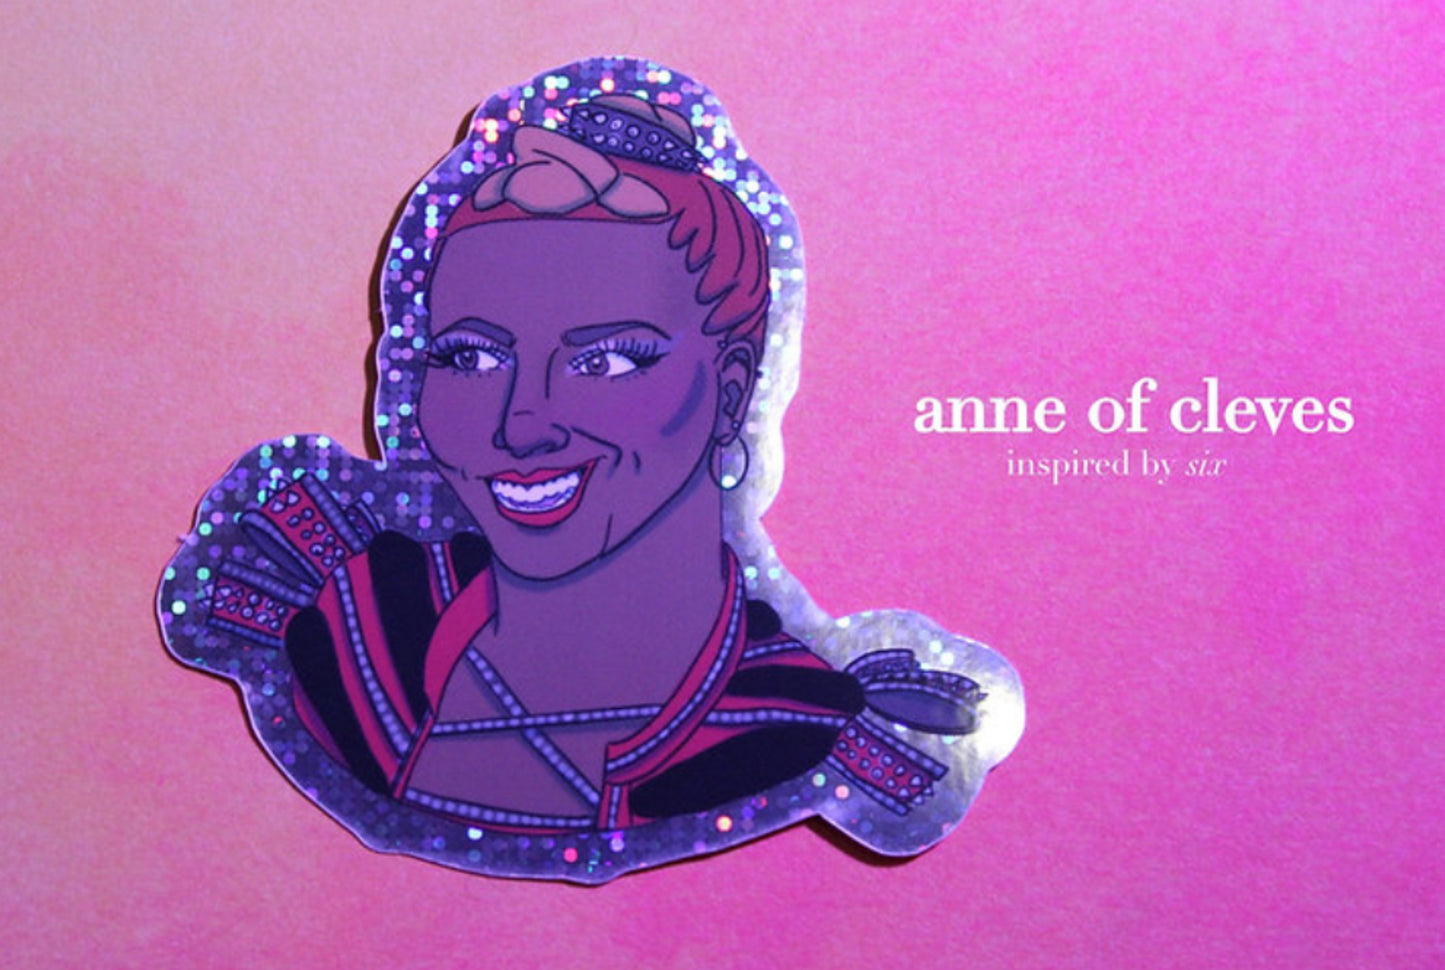 anne of cleves (sticker)